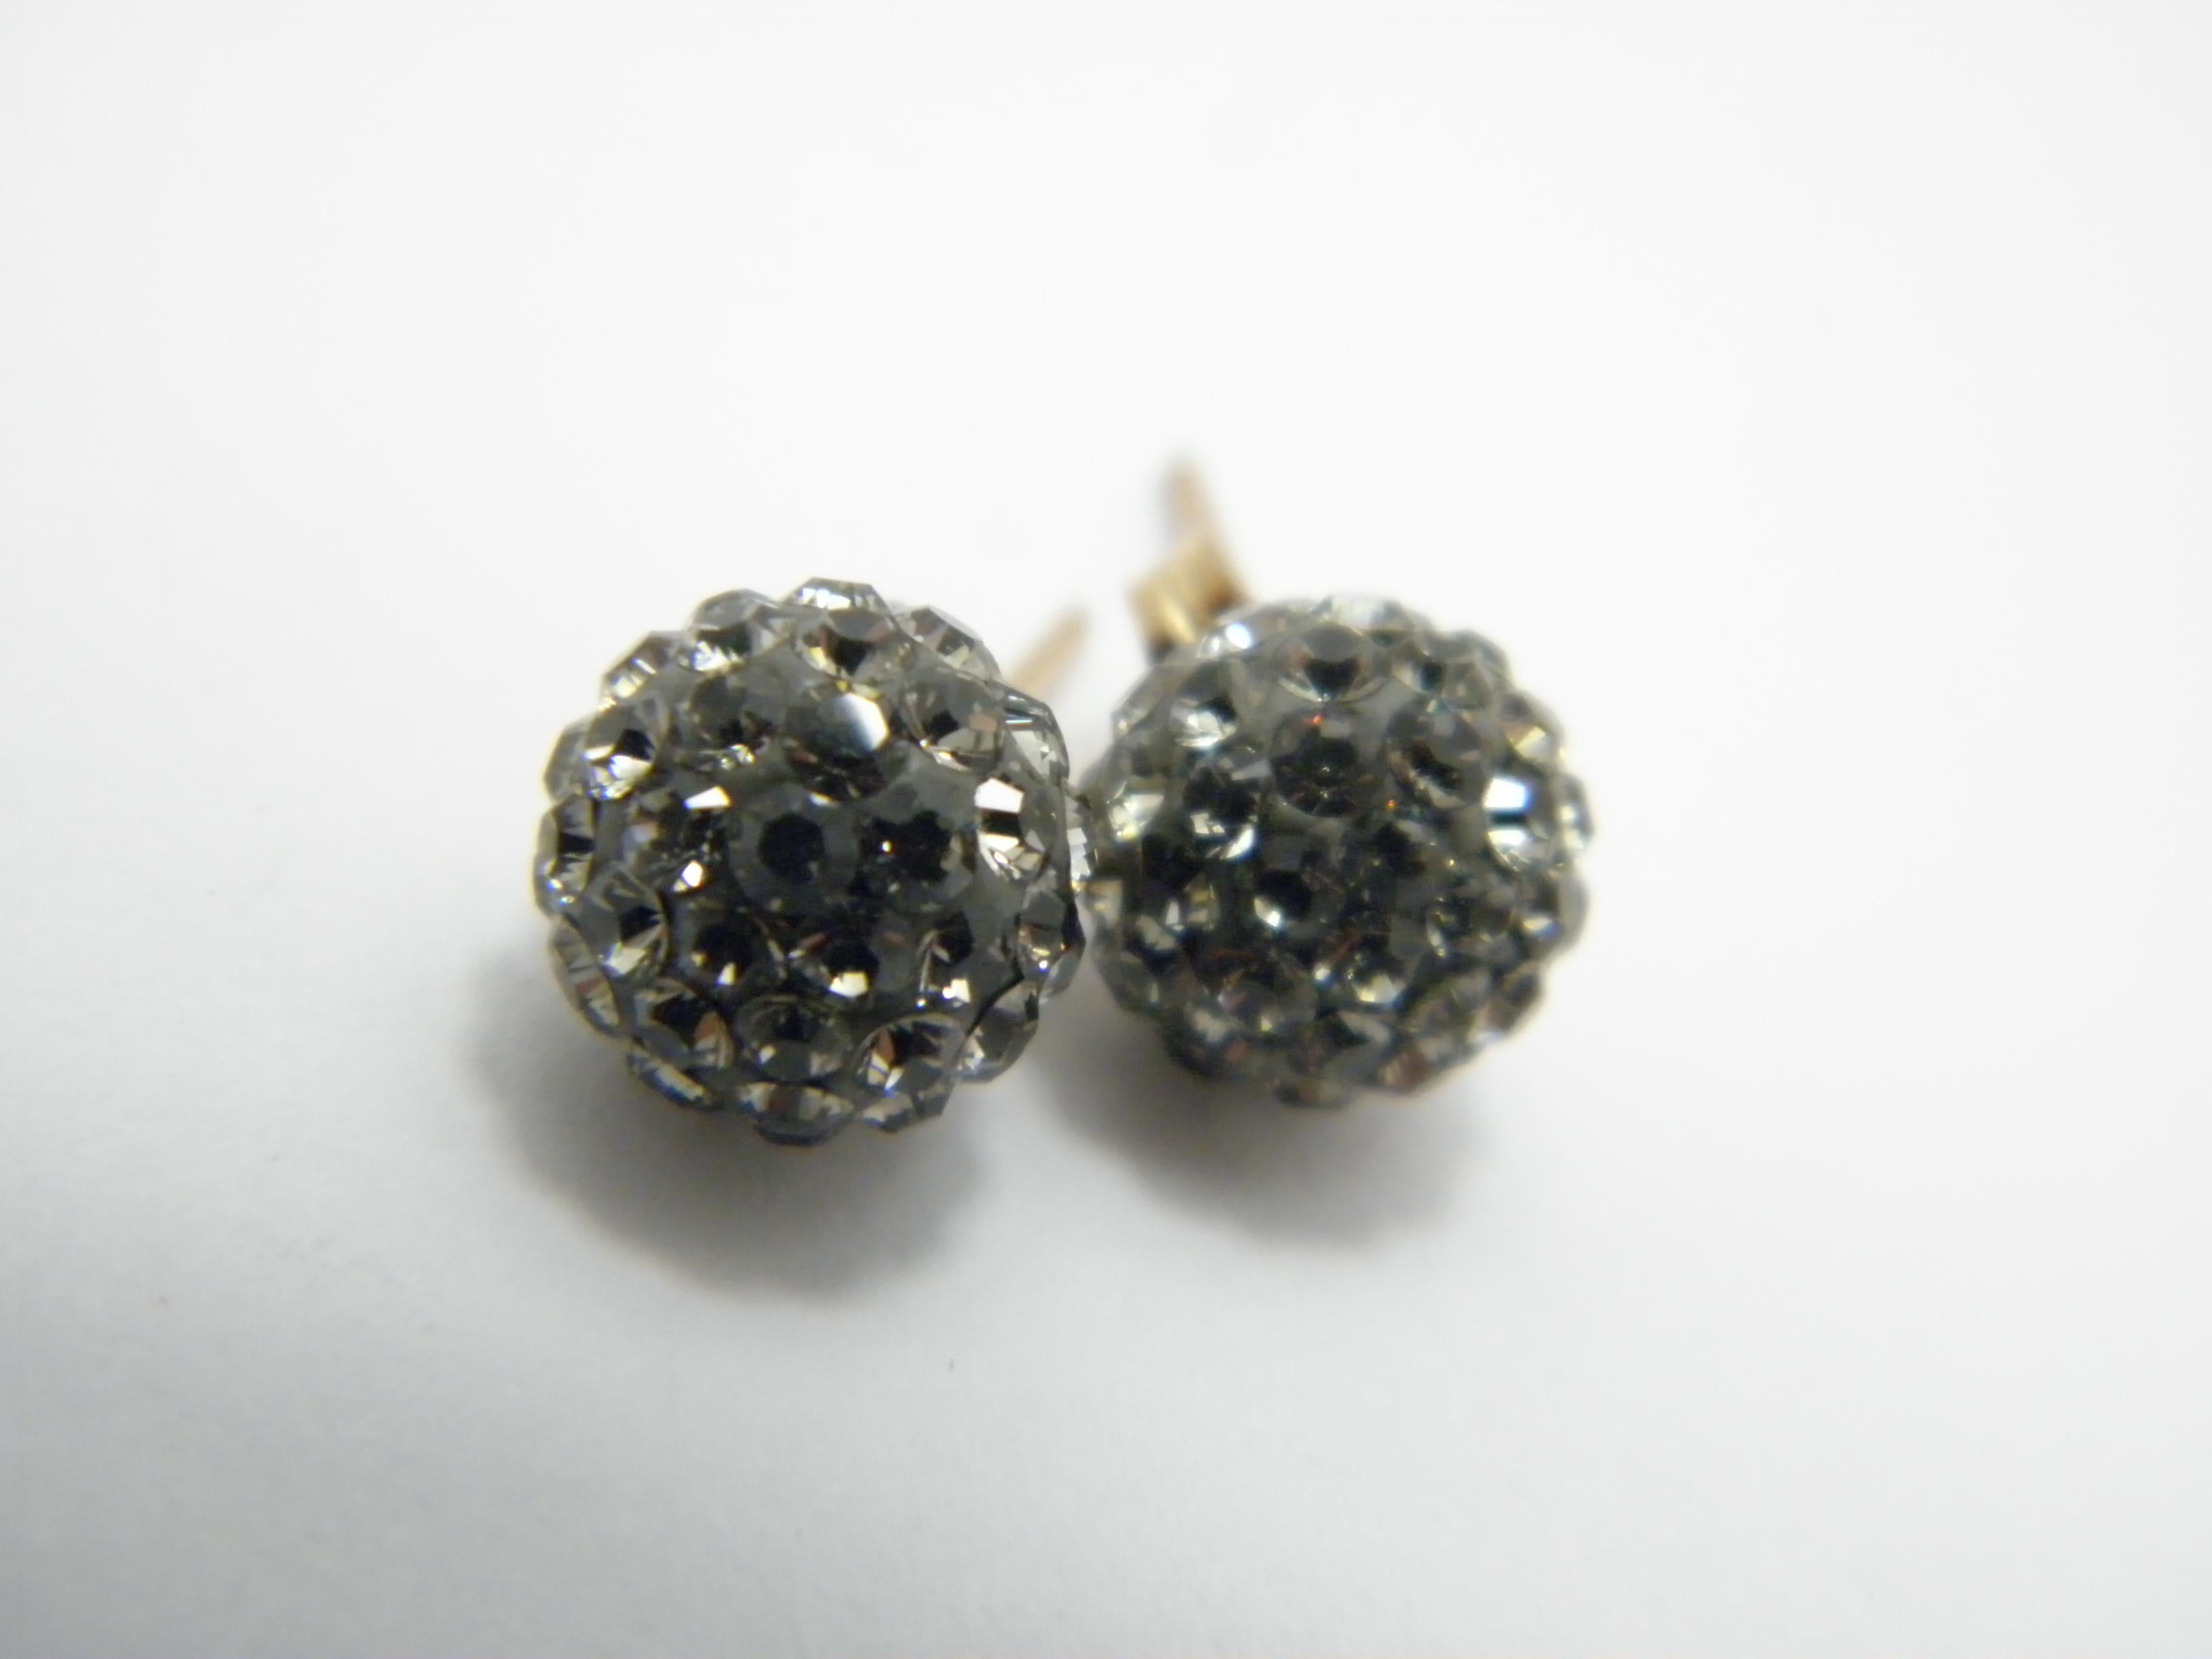 Vintage 9ct Gold Large Glitter Ball Crystal Stud Earrings 375 Purity VGC For Sale 2